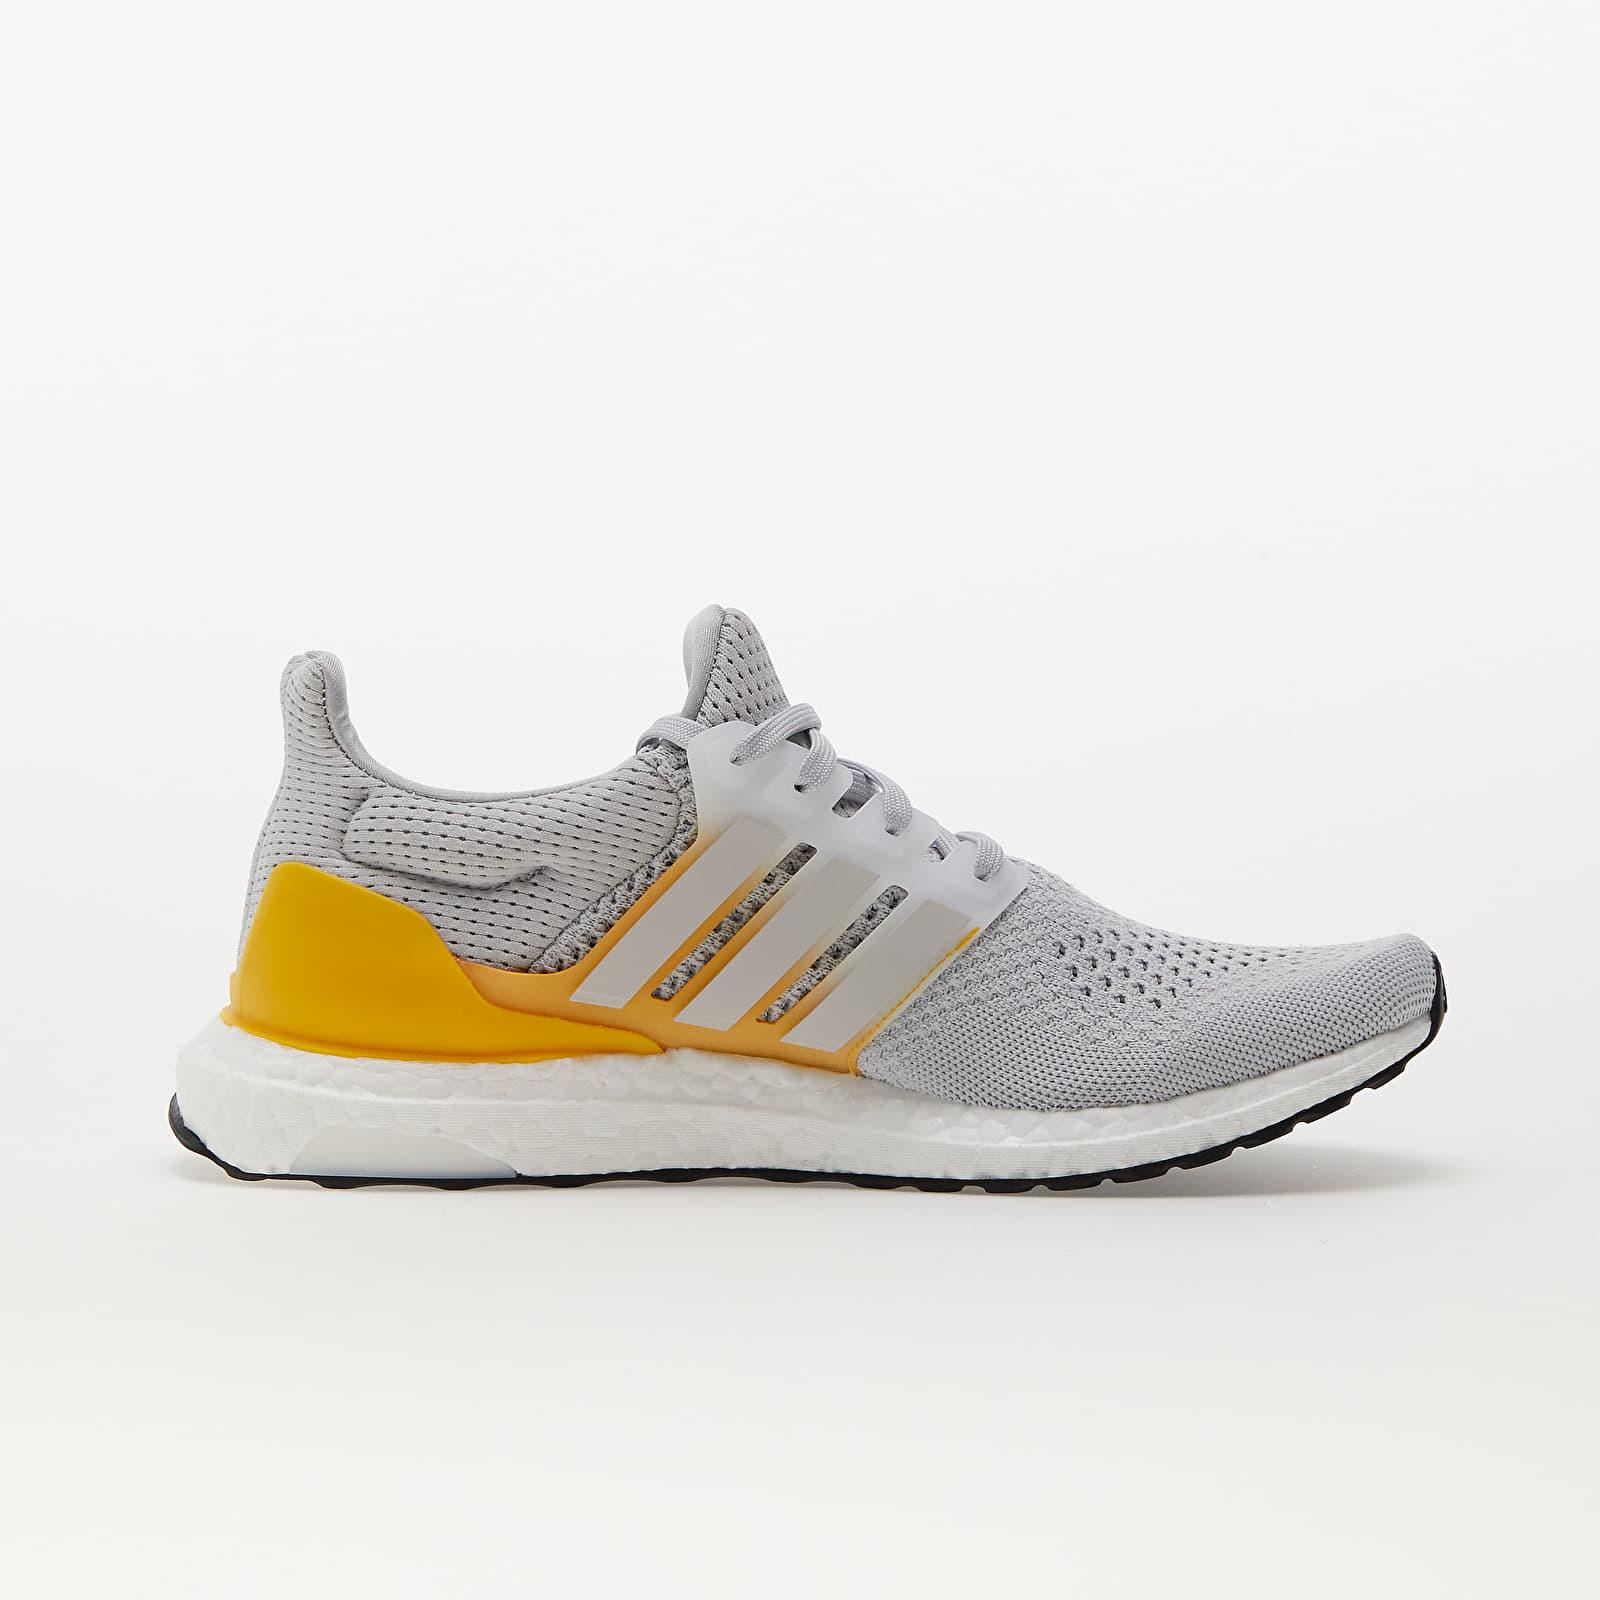 adidas Originals Adidas Ultraboost 1.0 Light Solid Grey/ Solid Grey/ Bold Gold White for Men Lyst